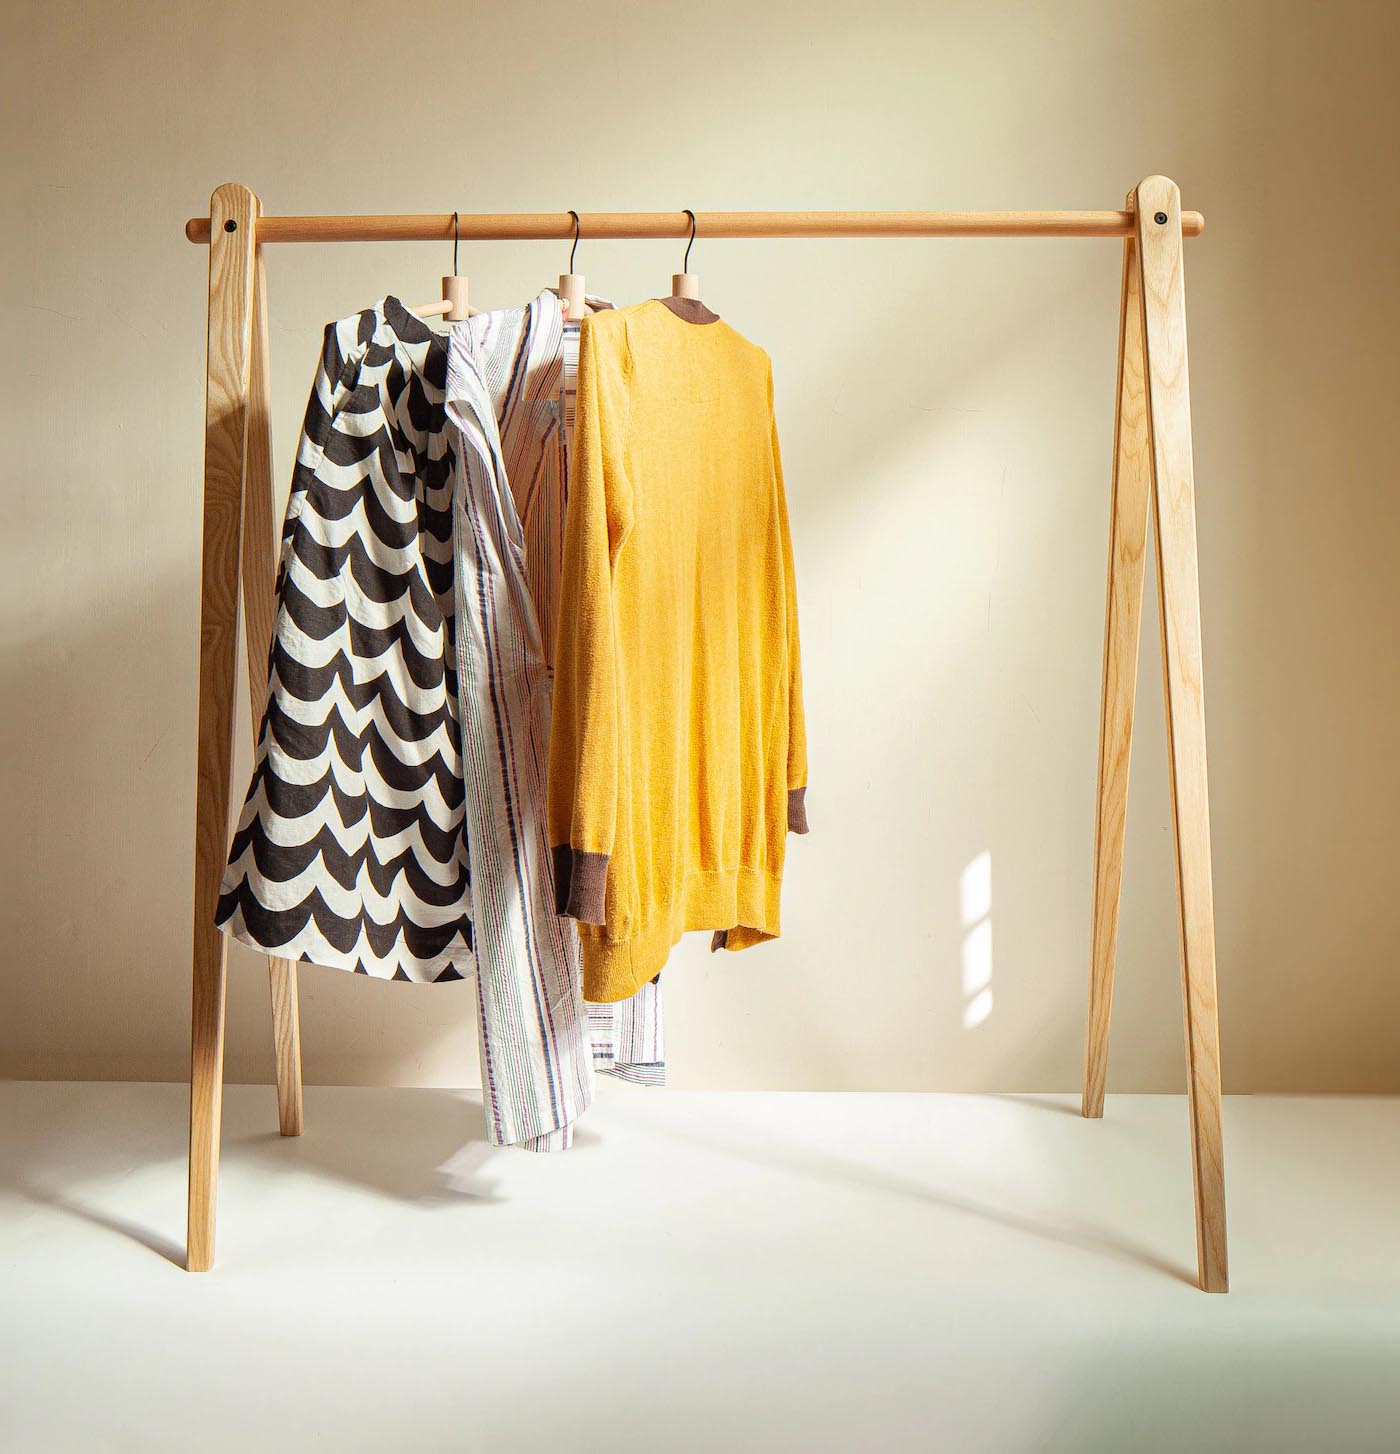 wooden clothes rack